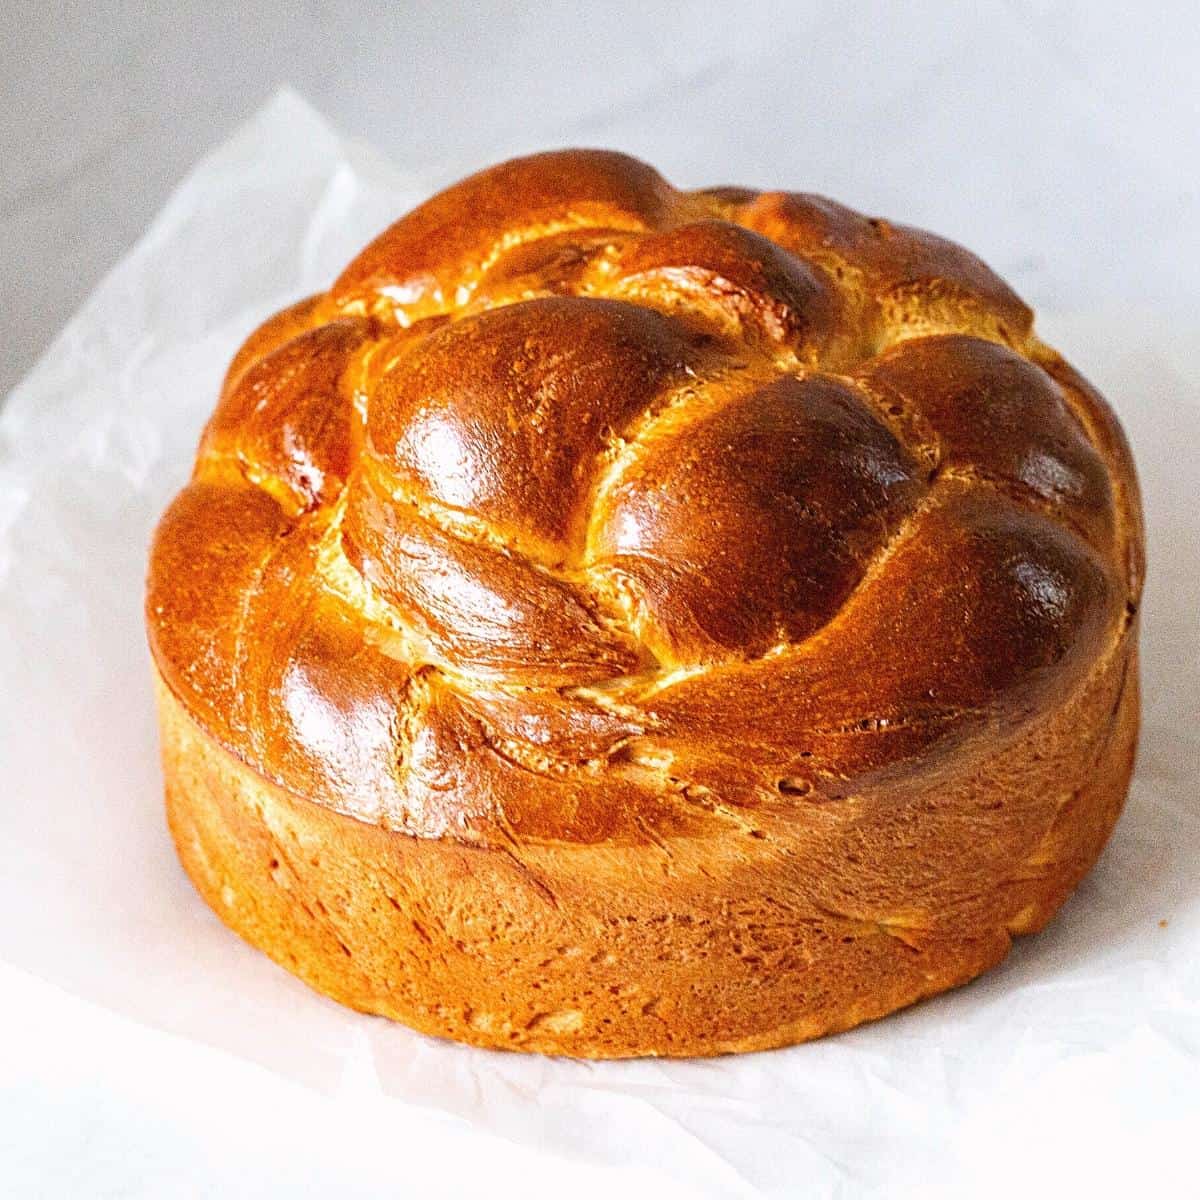 Round challah on the table.